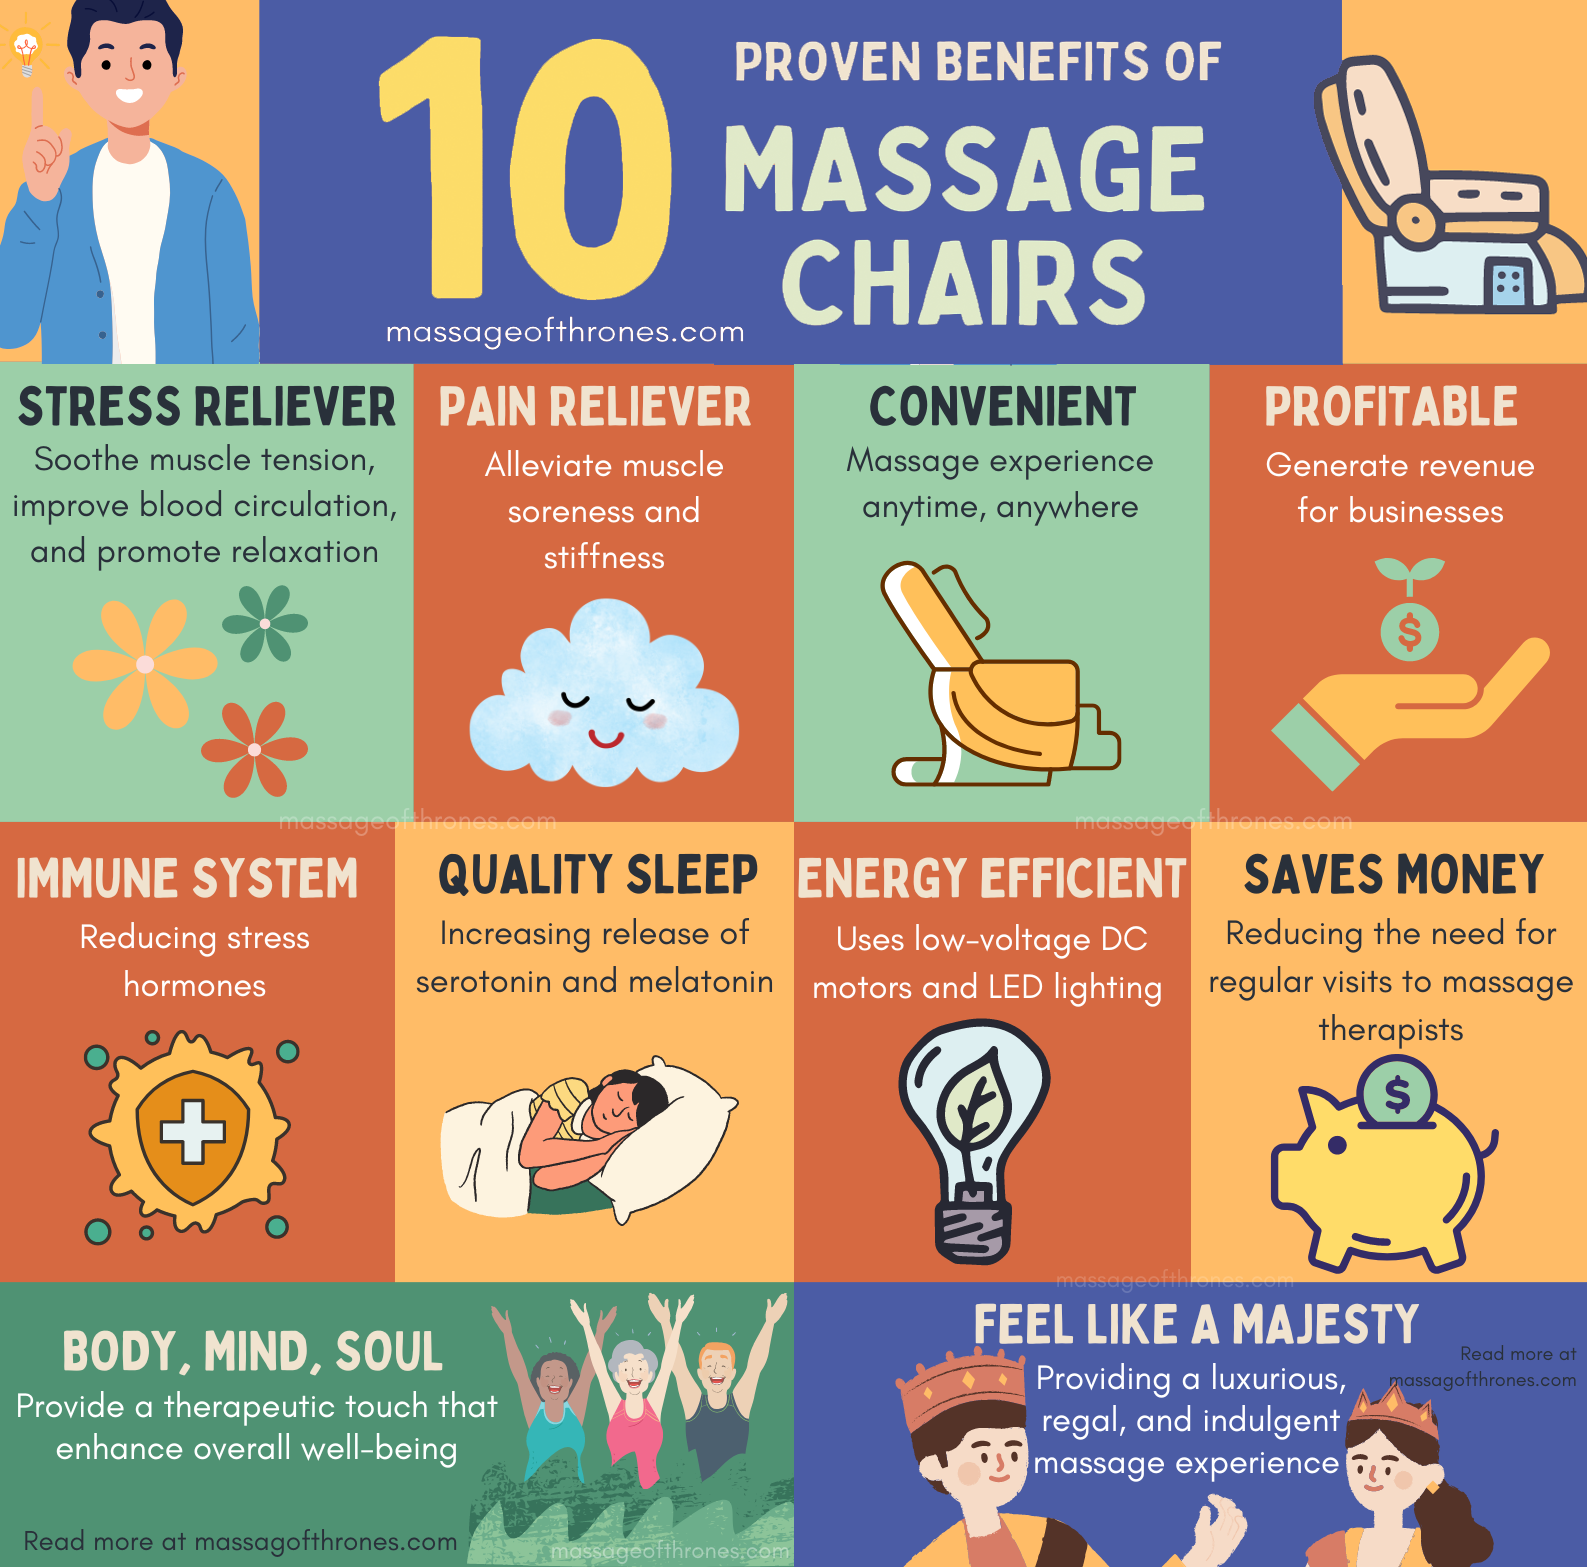 10 Benefits of Massage Therapy